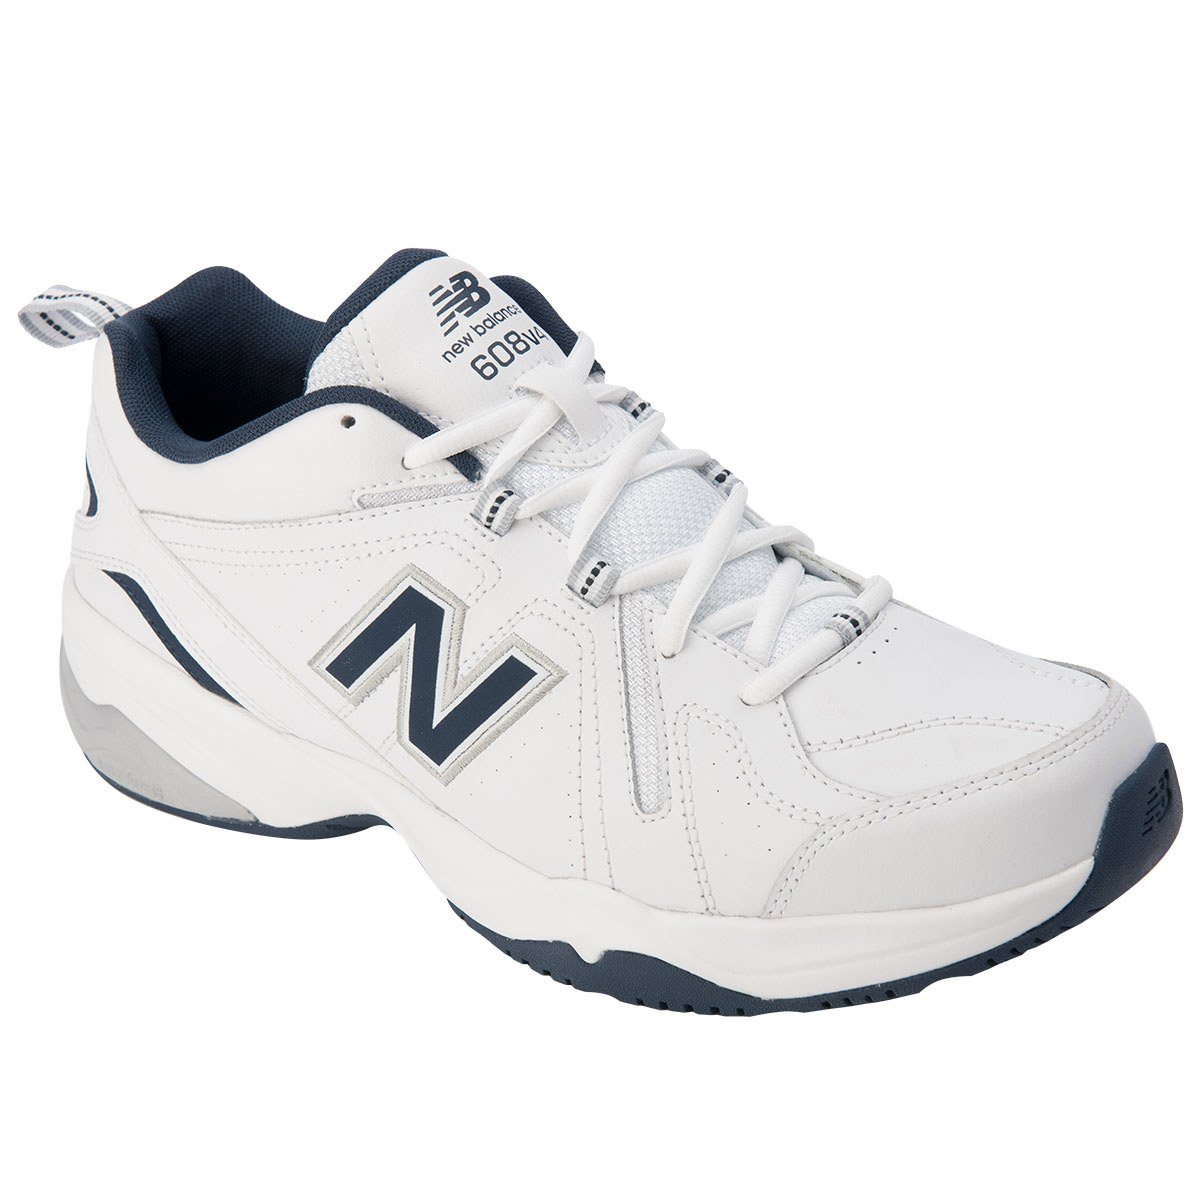 And lastly, the New Balance Men's Training Shoe your Dad is currently wearing are stained green, so go on and get Dad a fresh new pair.  <br/><br/> You can pick this up at  <a href="https://amzn.to/2kbTYwY">Amazon for about $32</a>.